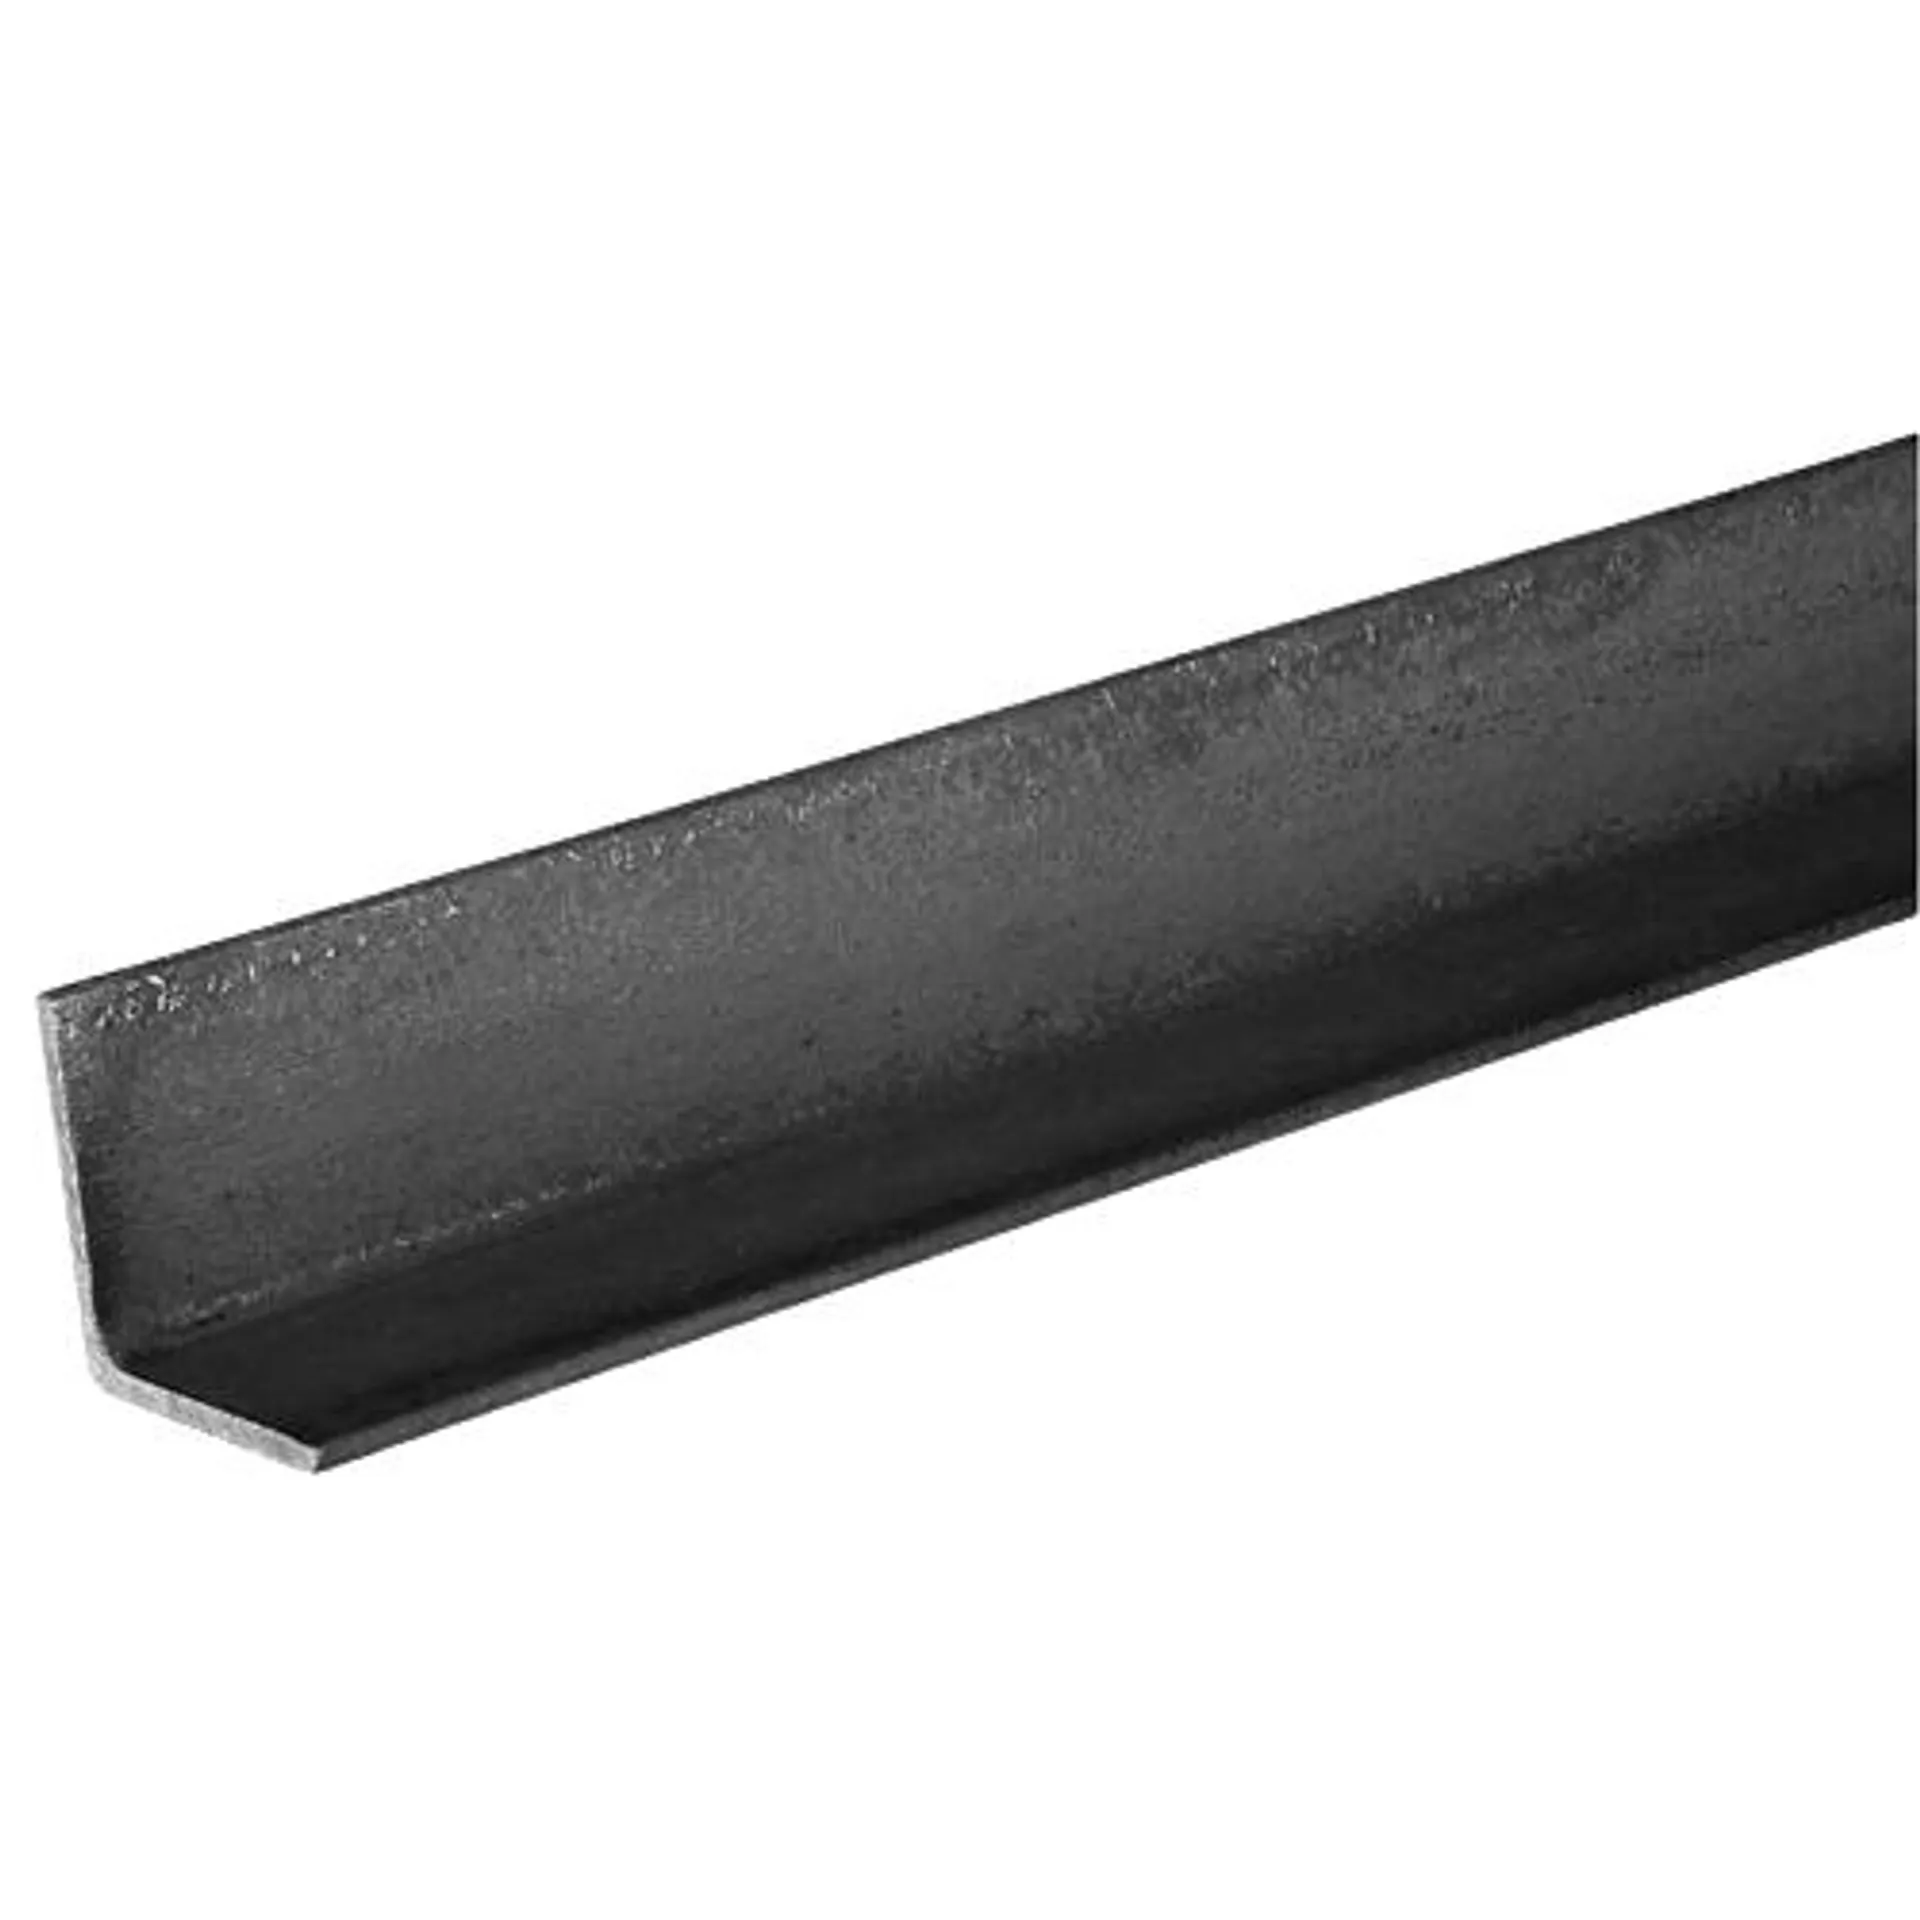 SteelWorks Plain Steel Hot-Rolled Weldable Steel Solid Angle - 2" x 3'